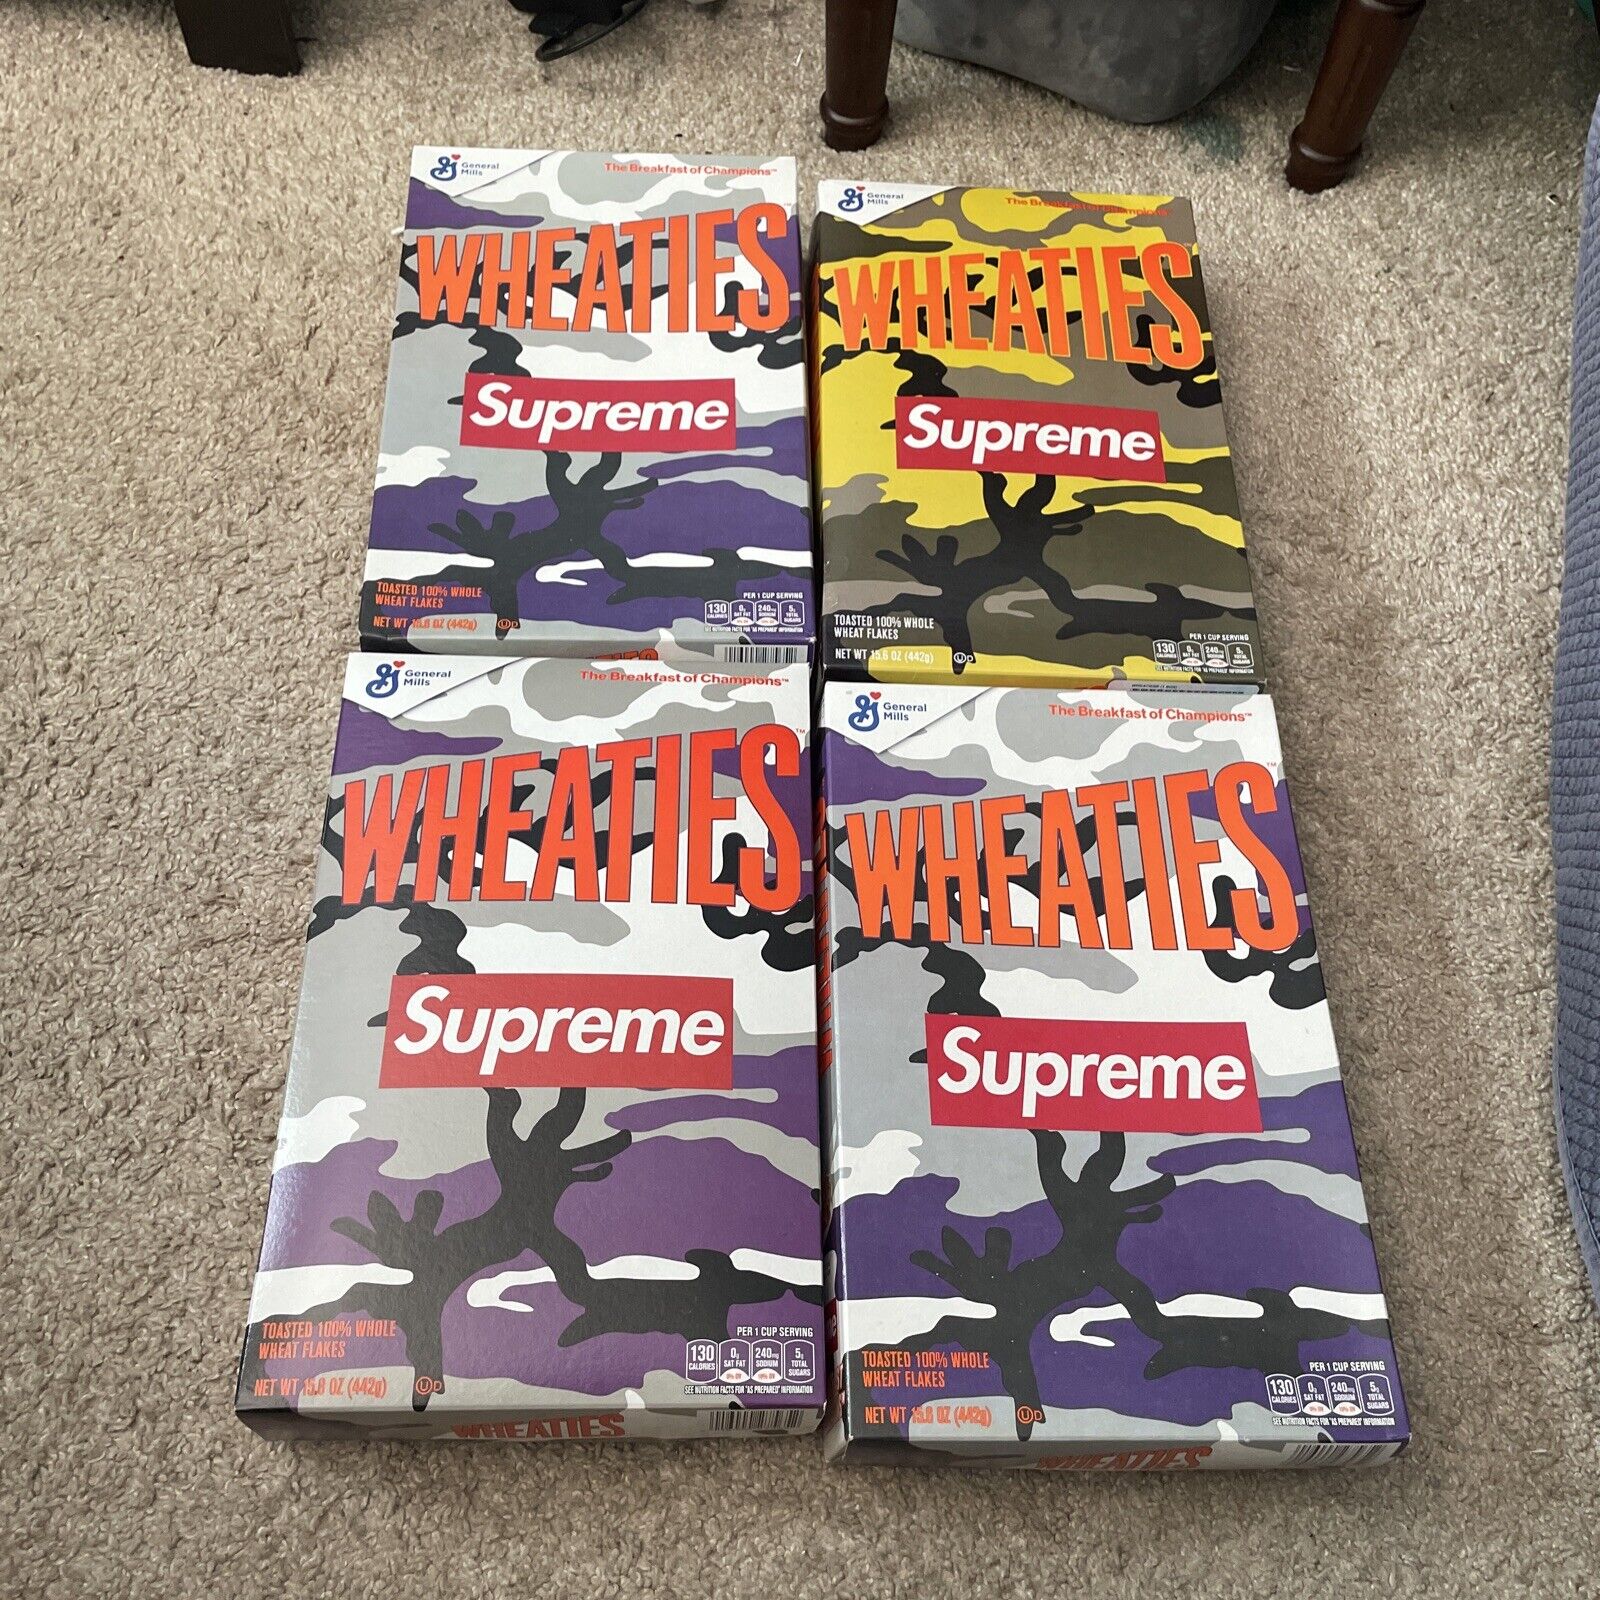 4 Boxes Of Supreme x Wheaties Cereal 3x  Purple 1x Yellow, Slight Box Damaged